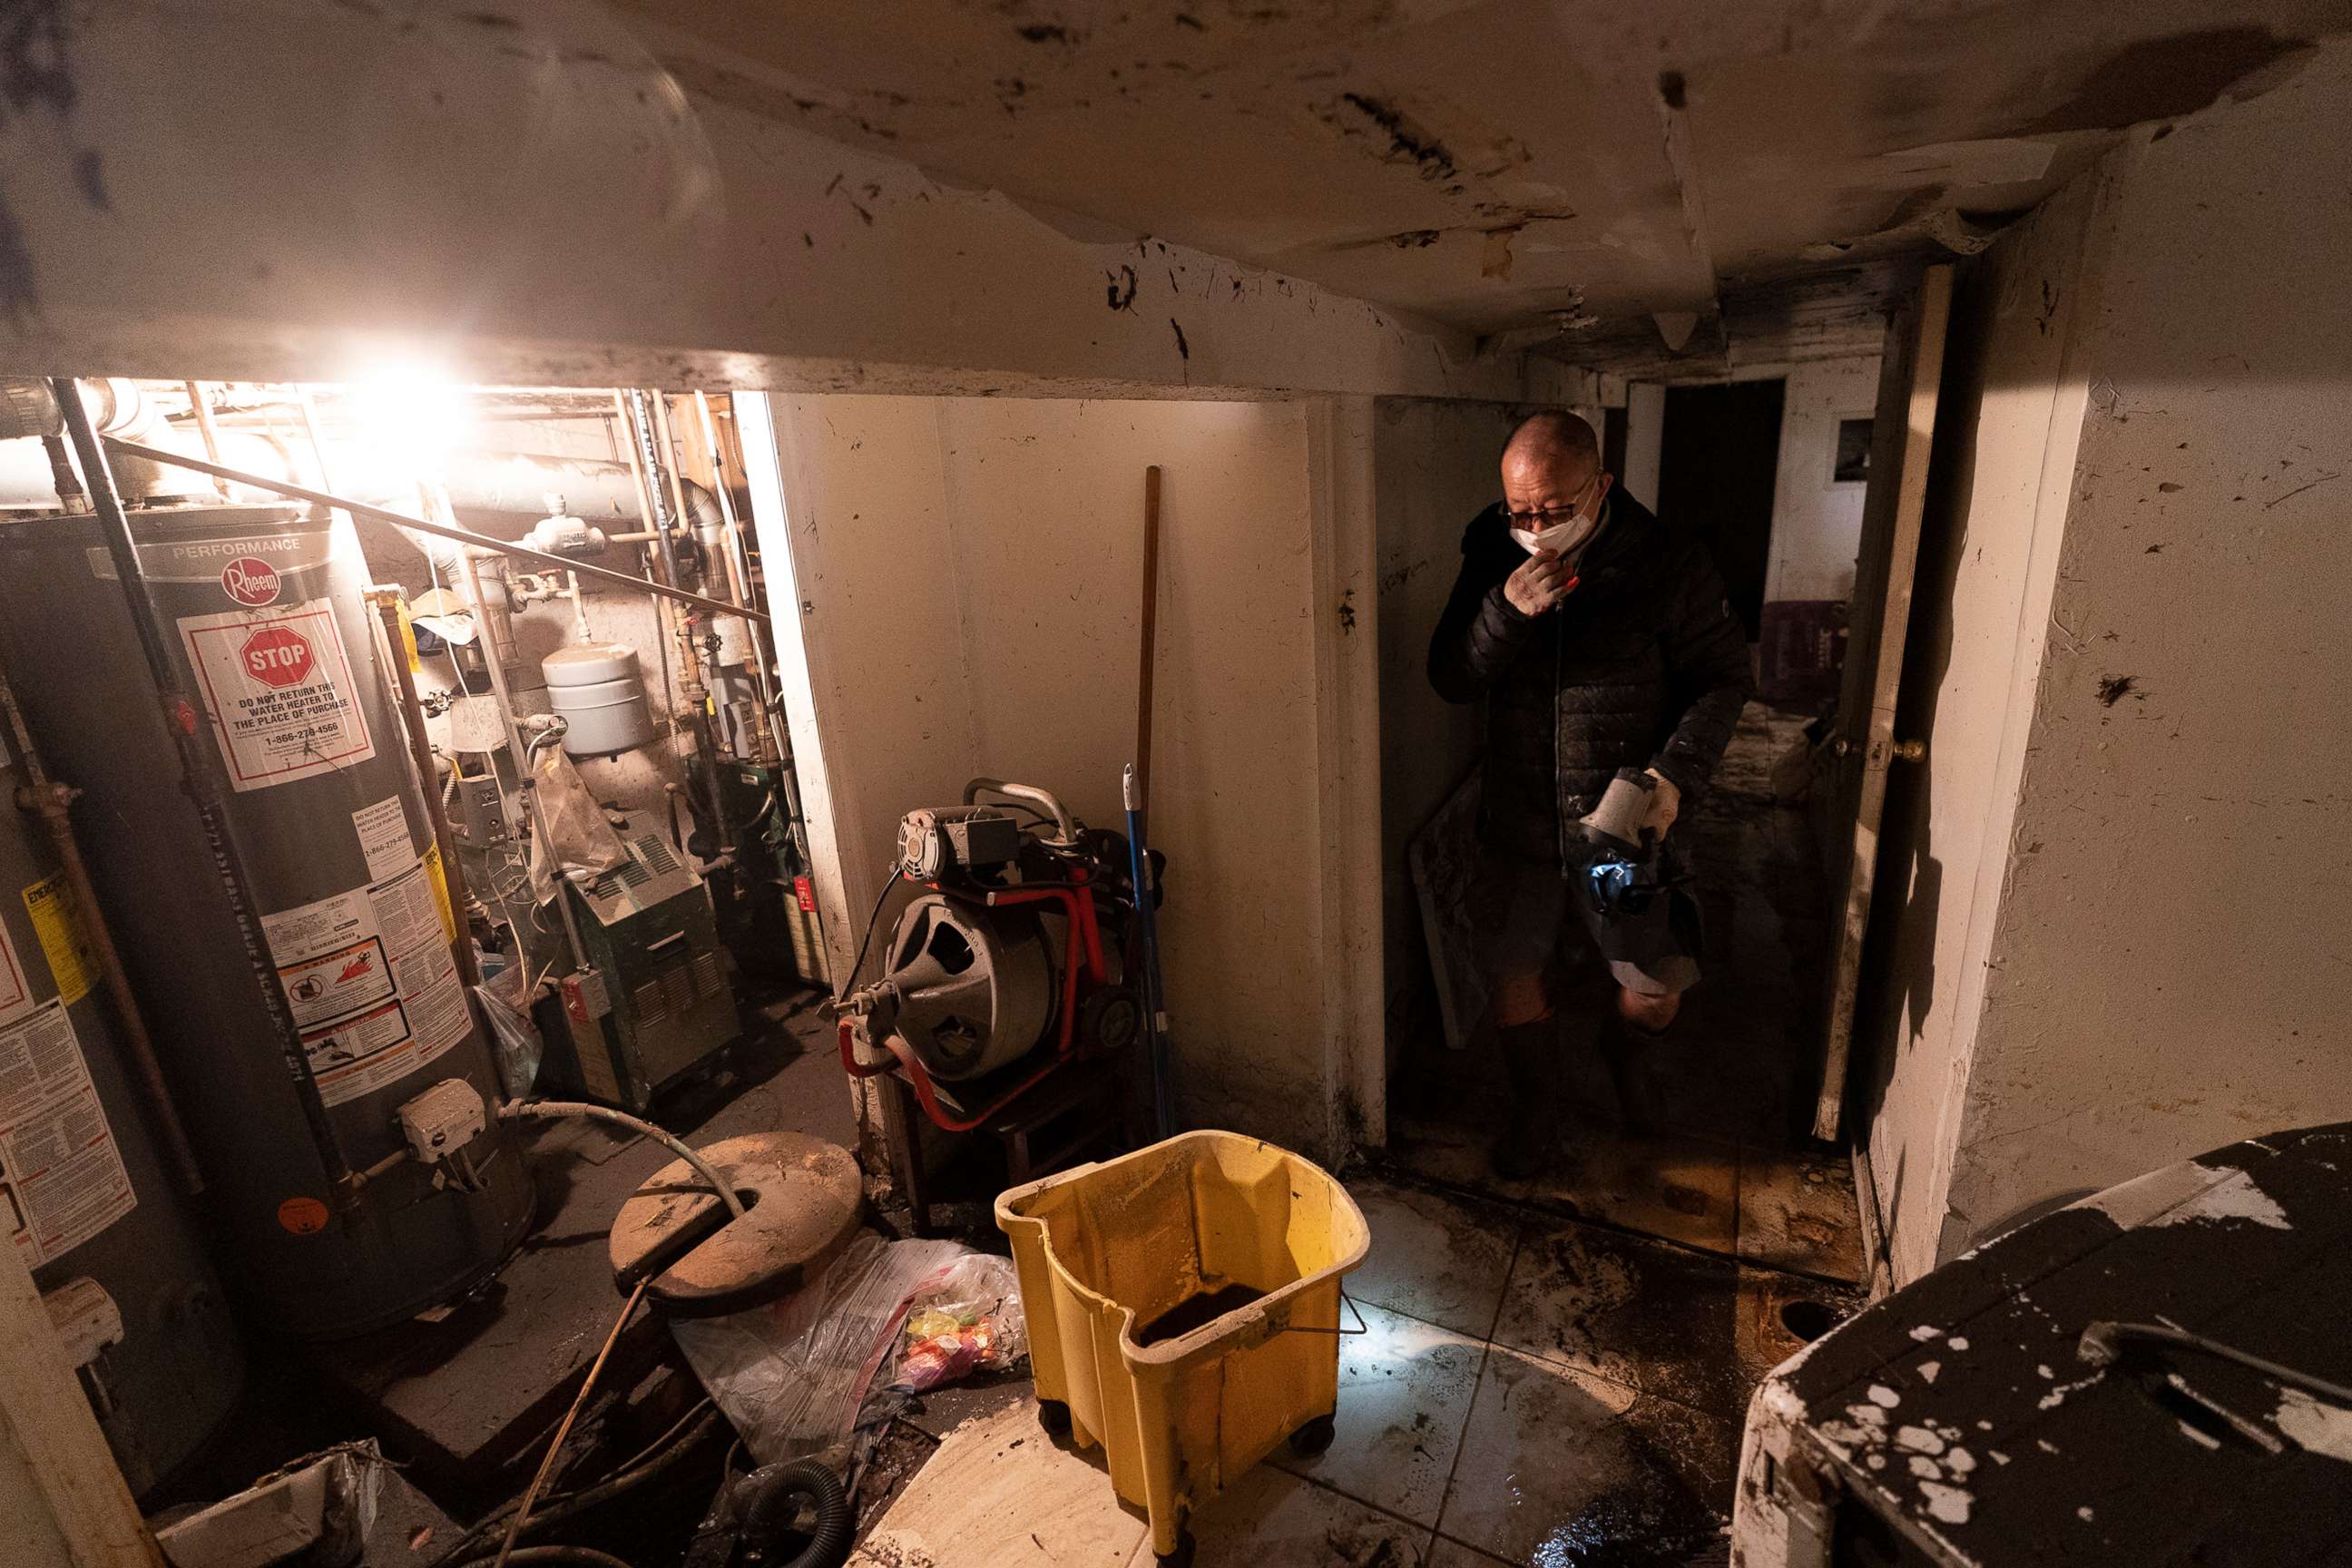 PHOTO: A man who gave his name as John, helps clean a friend's basement, Sept. 3, 2021 in Queens, N.Y.